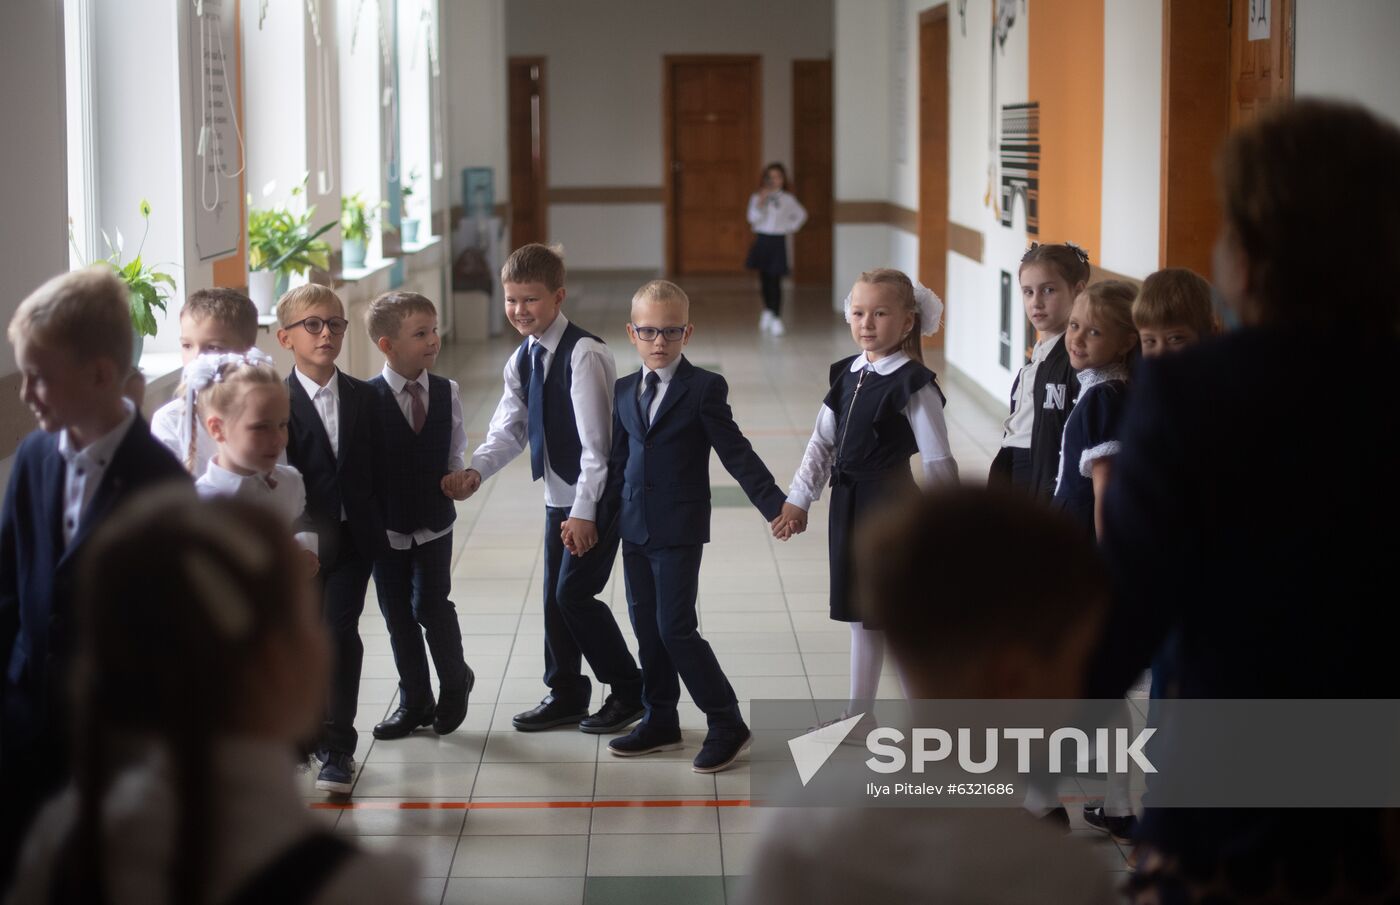 Russia The First School Day